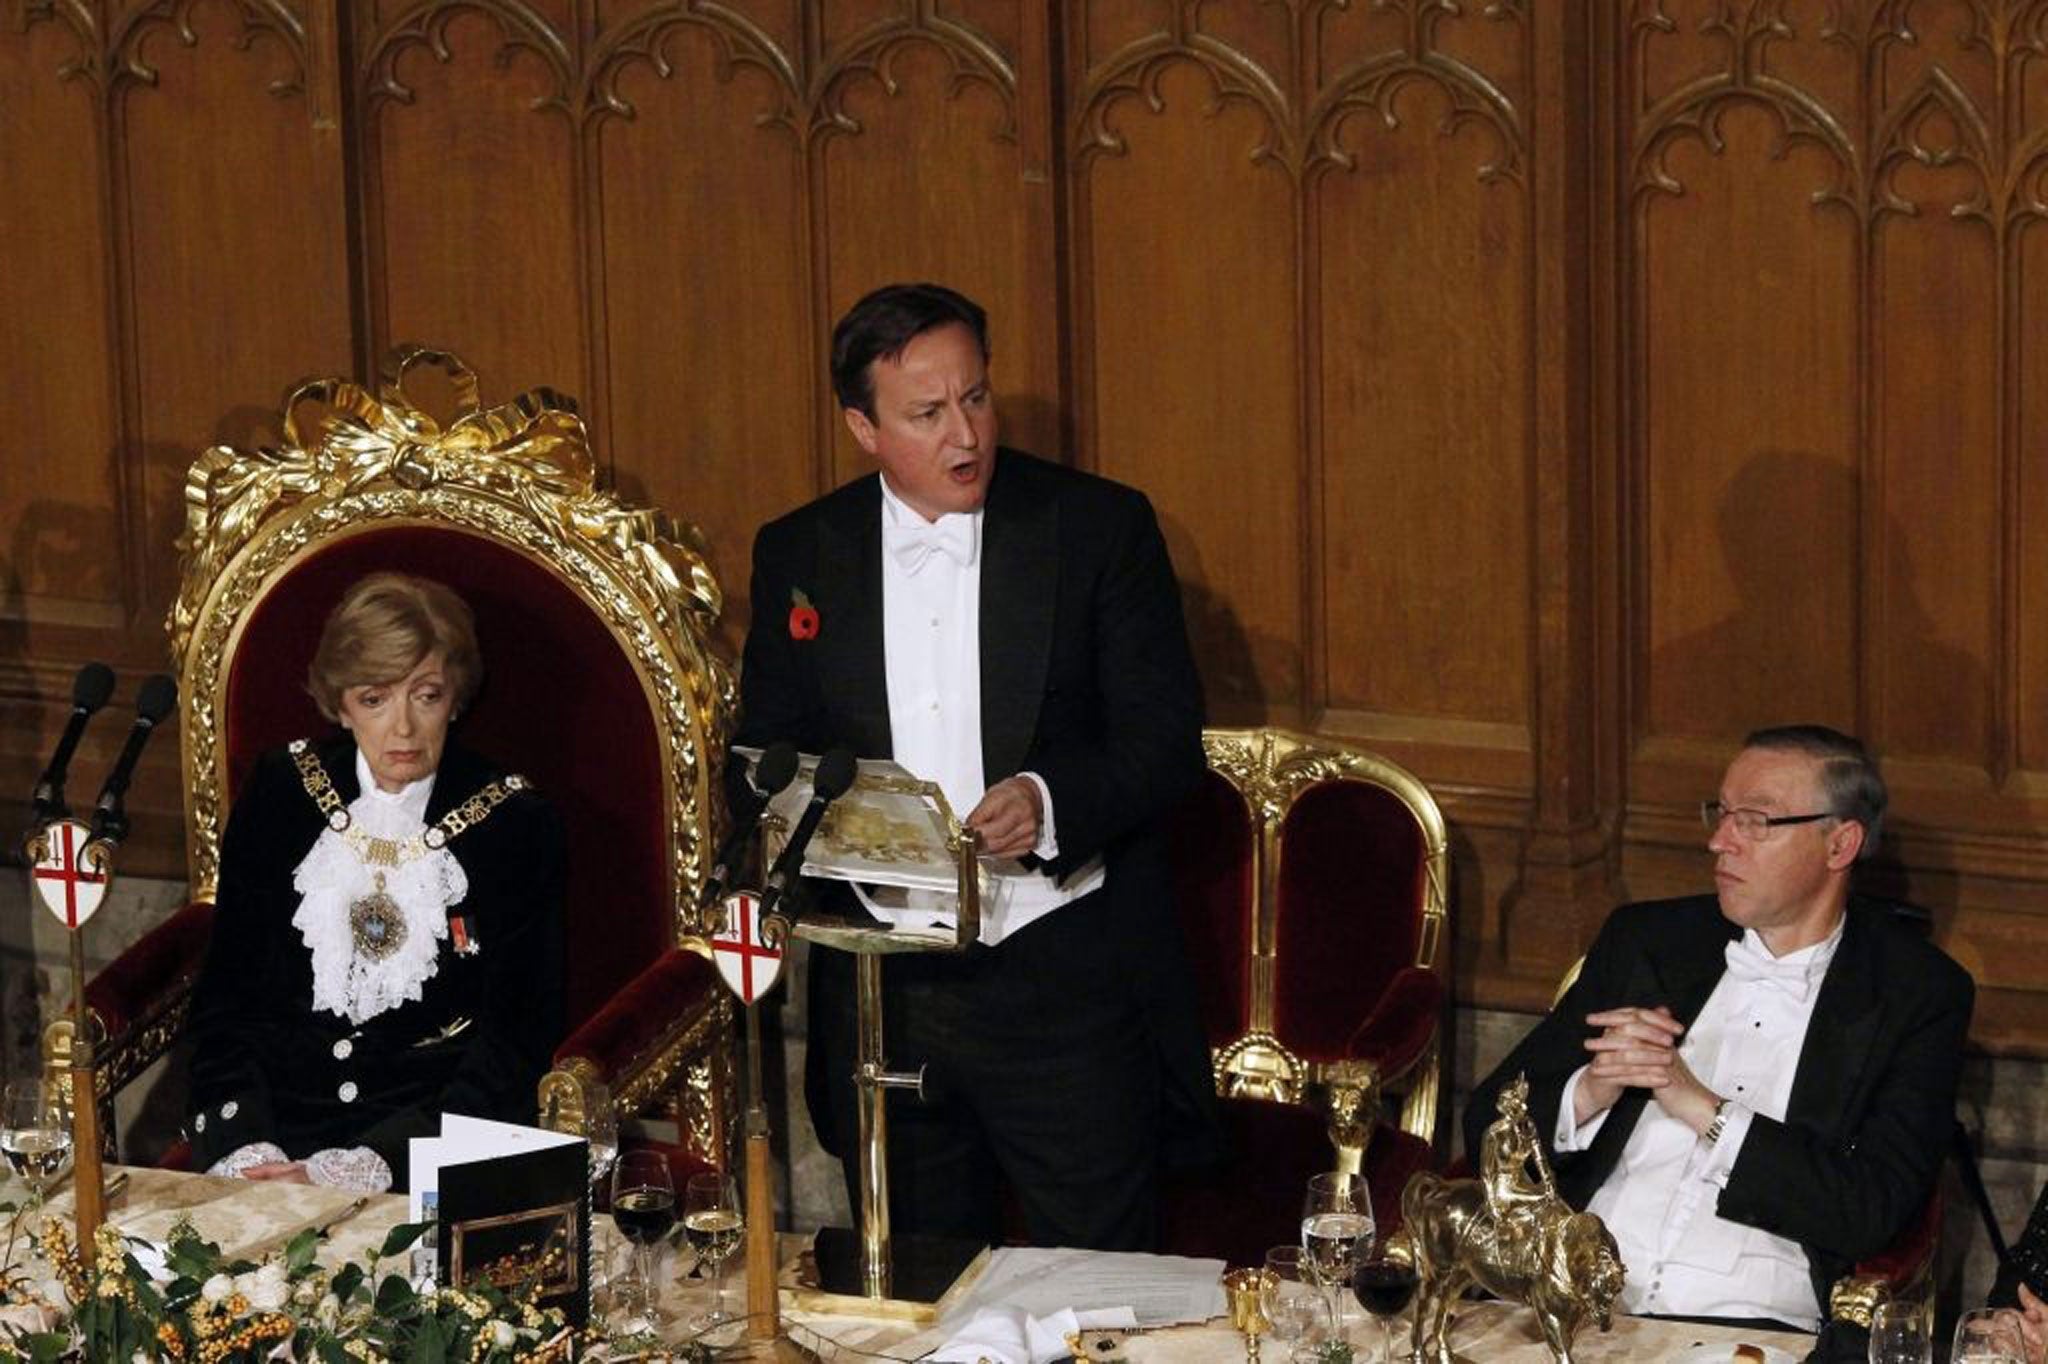 David Cameron at the Lord Mayor's banquet last year, where he called for a permanent culture of austerity